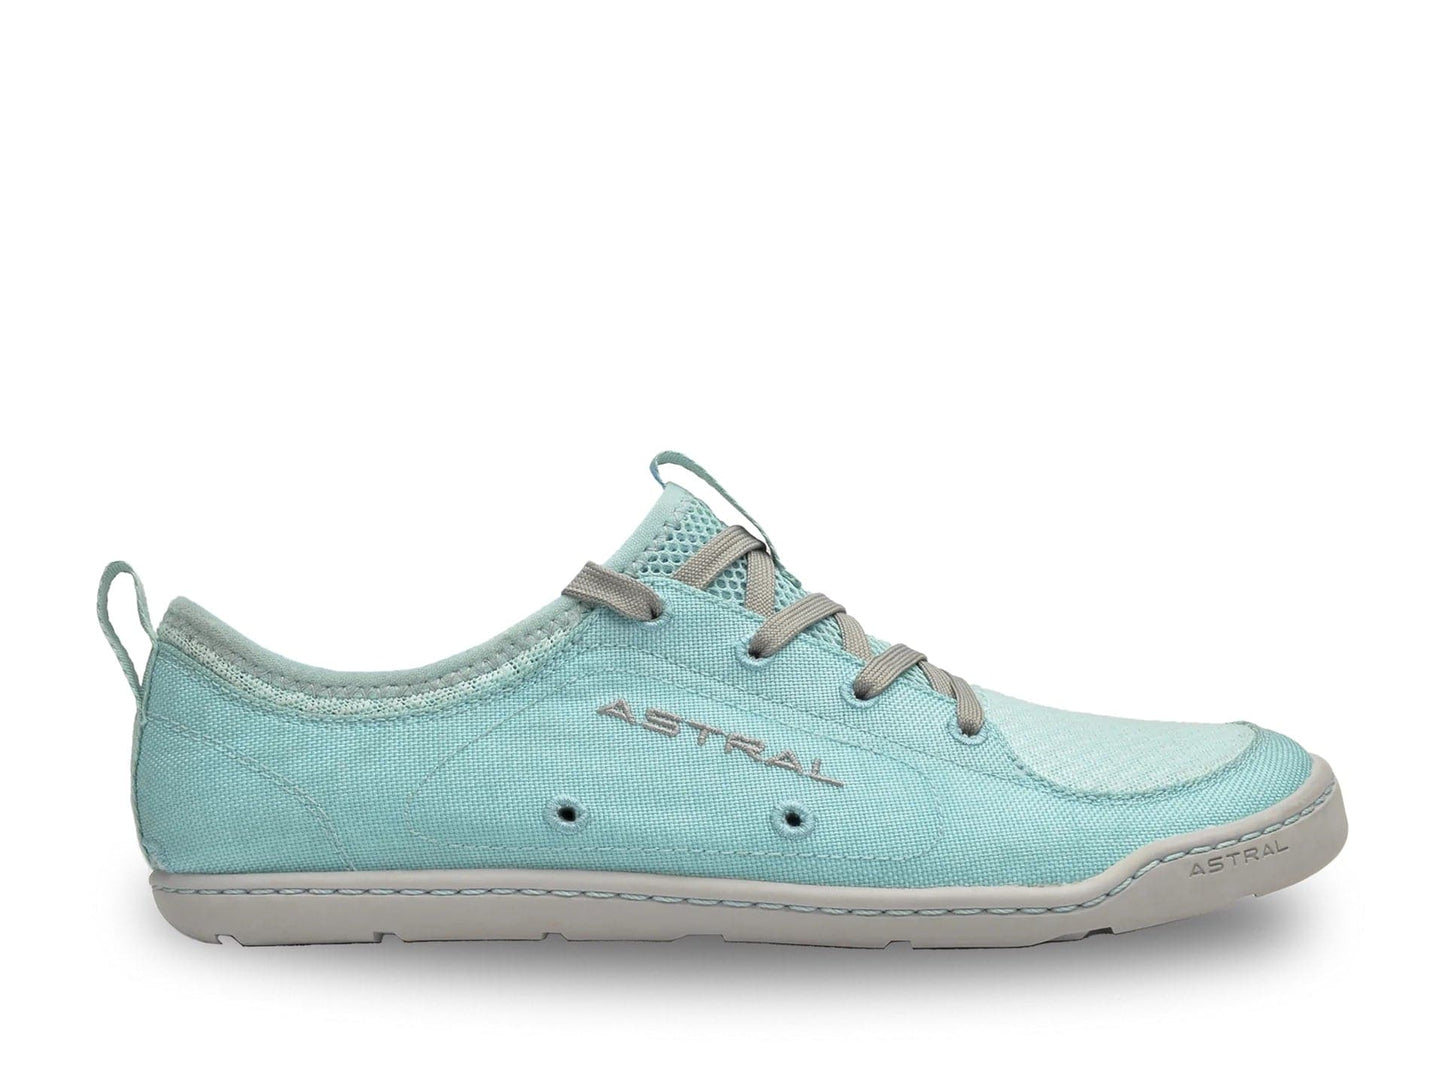 Featuring the Loyak - Women's women's footwear manufactured by Astral shown here from a twelfth angle.